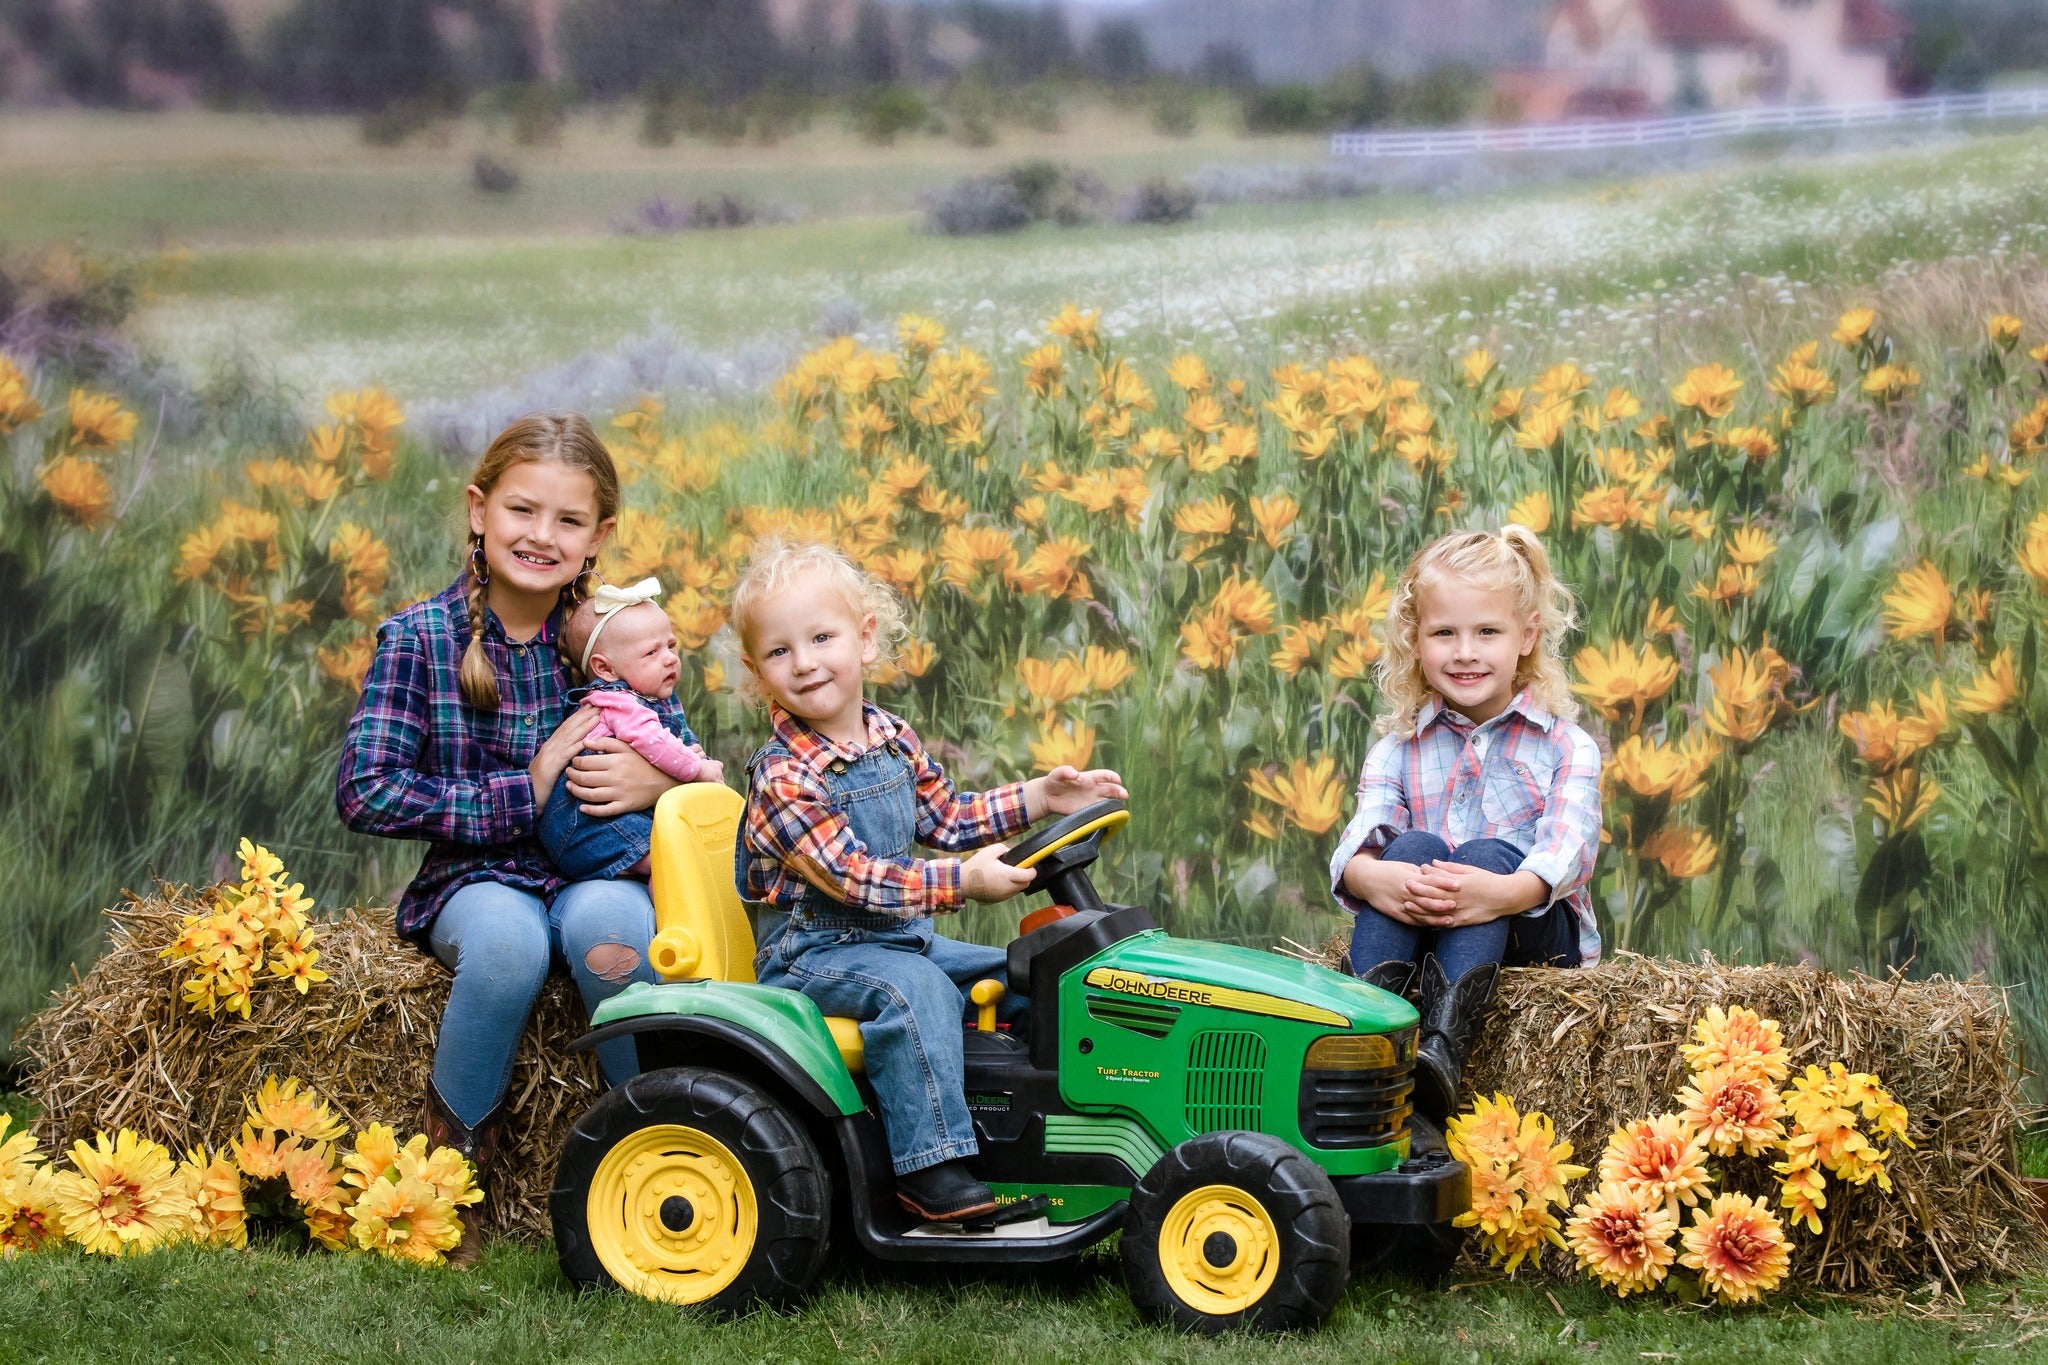 Kate Mountain Meadow Summer Sunflowers Backdrop for Photography Designed by Lisa Granden